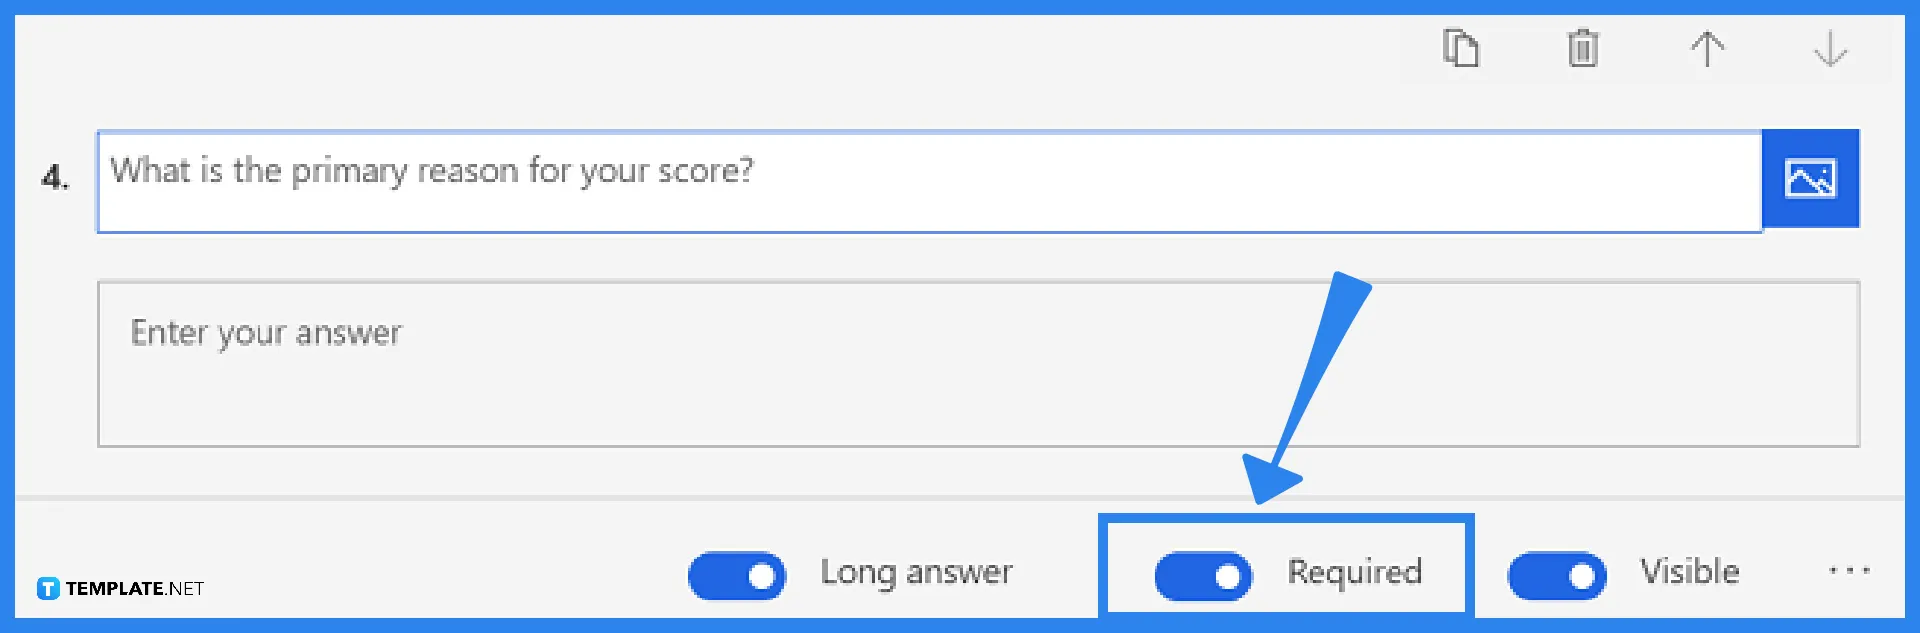 how-to-create-a-survey-in-microsoft-forms-steps-5